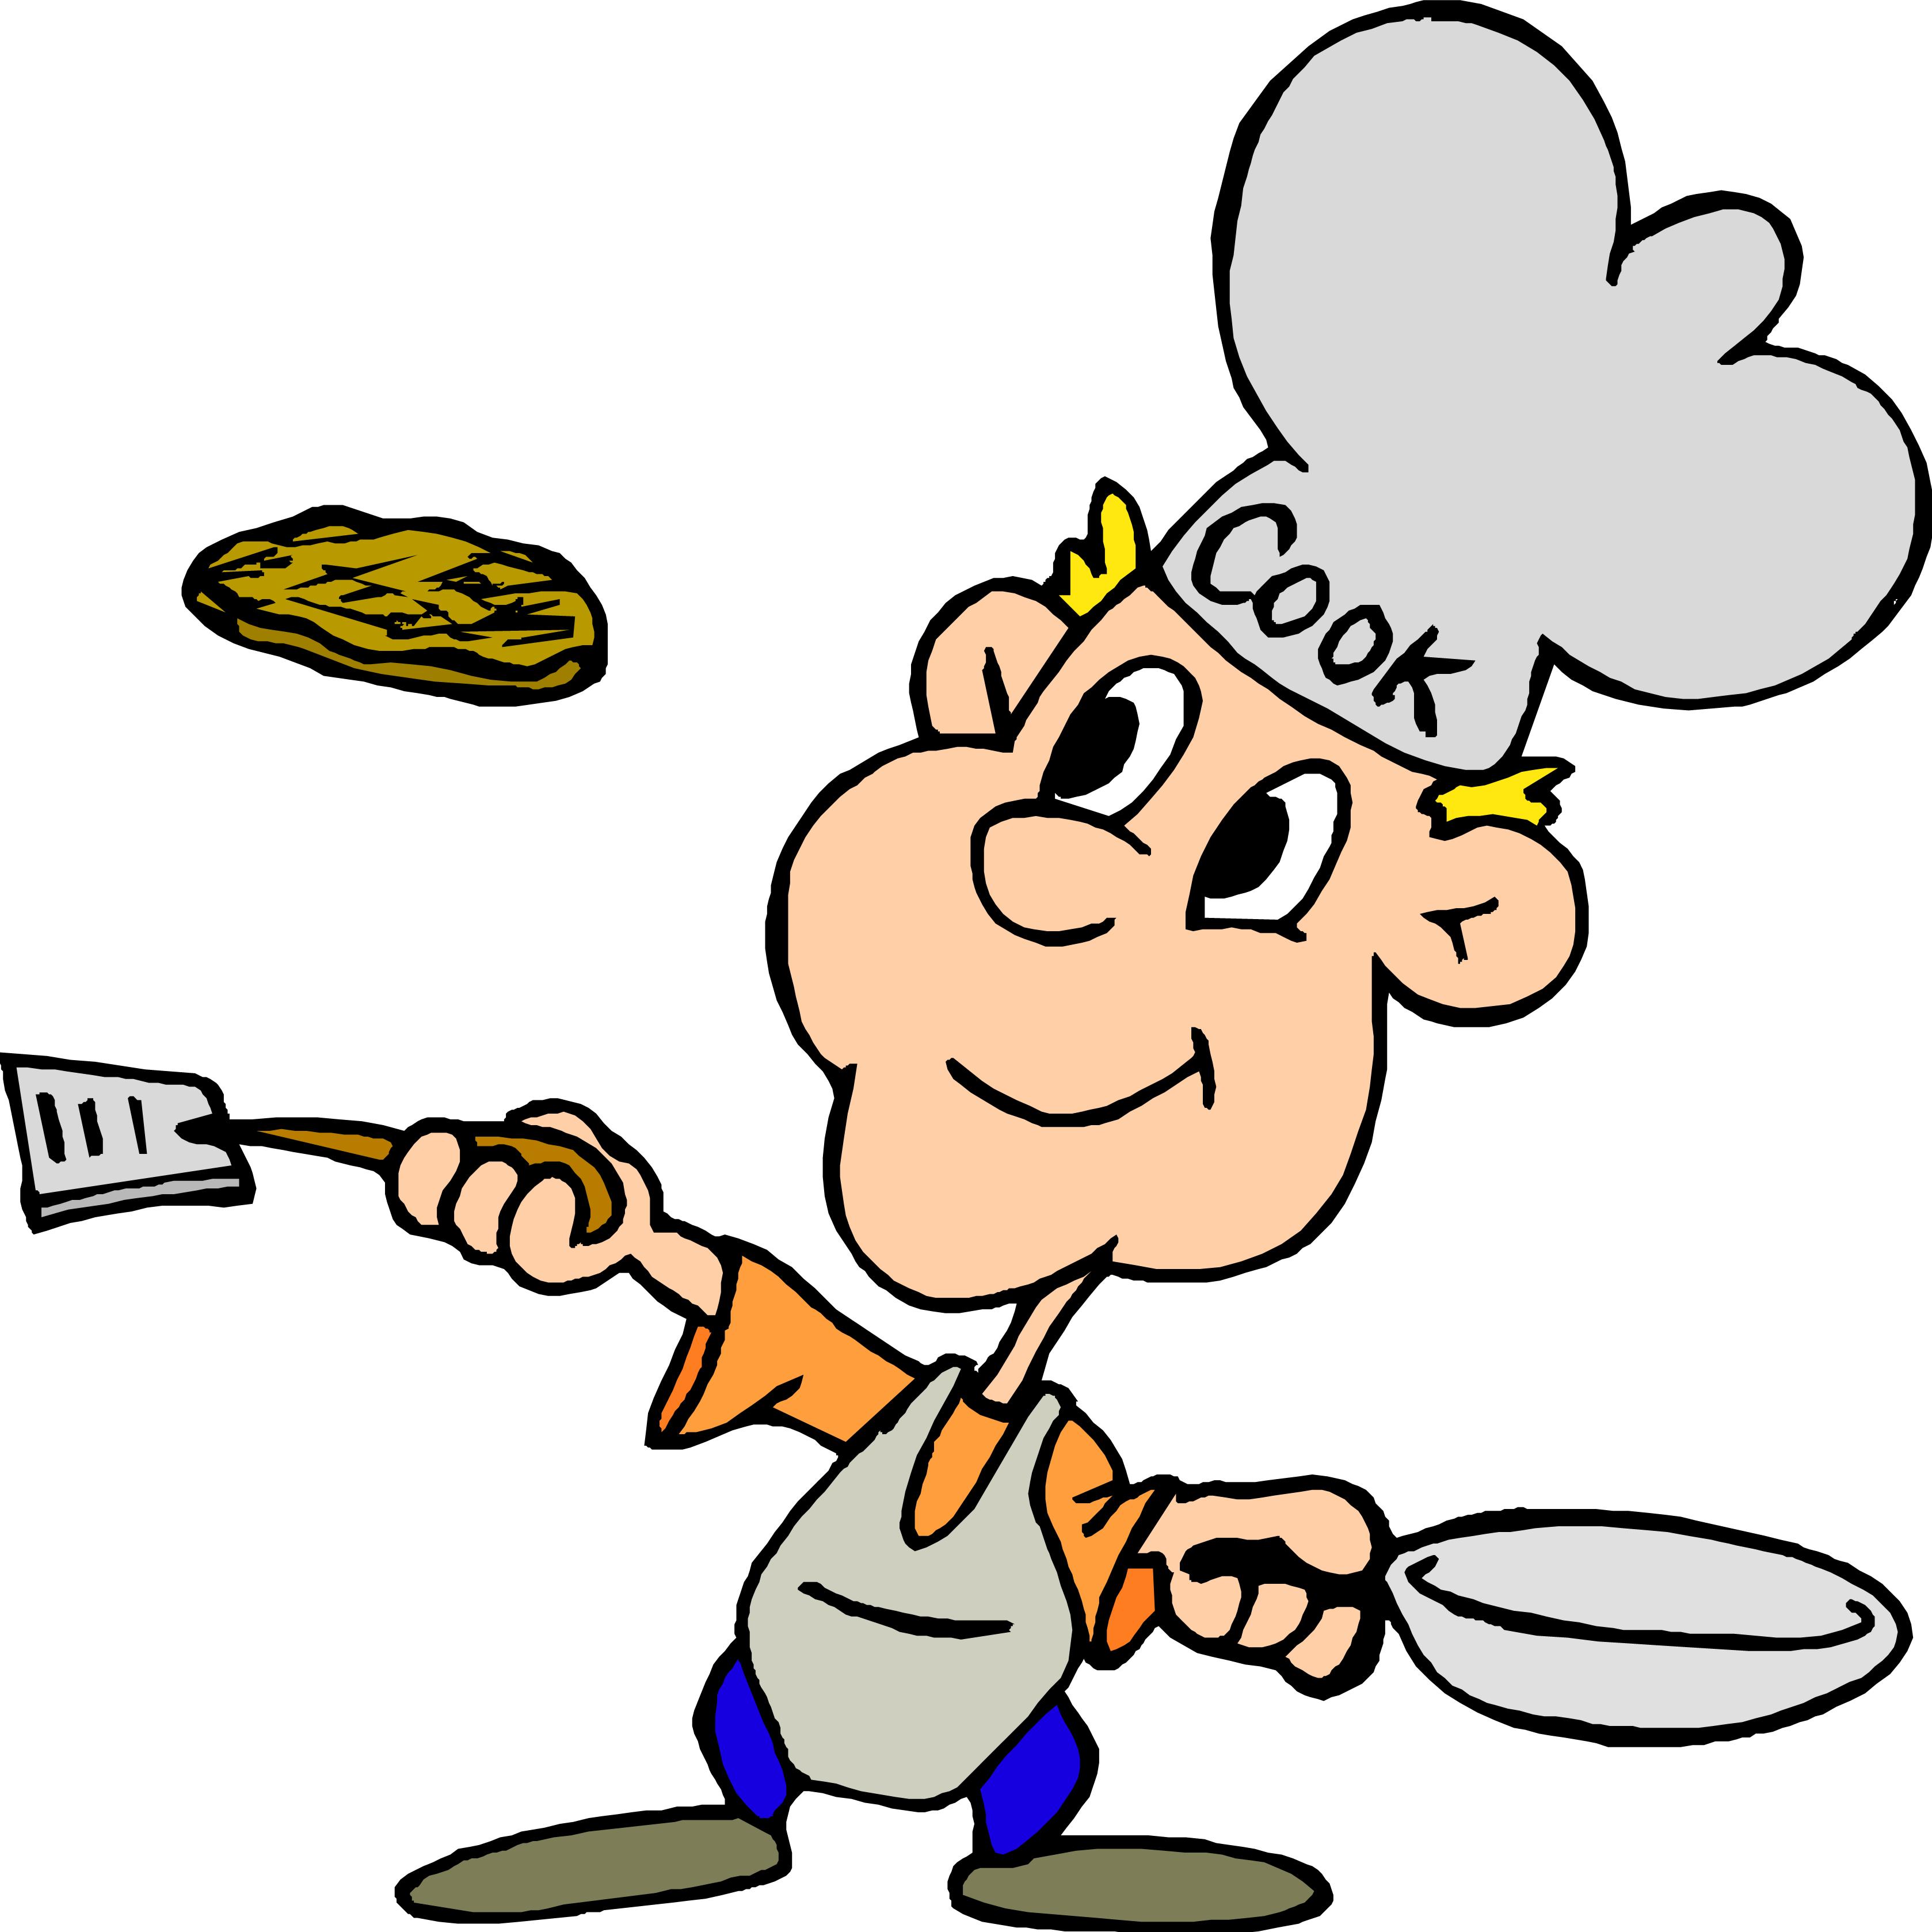 Breakfast Clipart - Cliparts.co